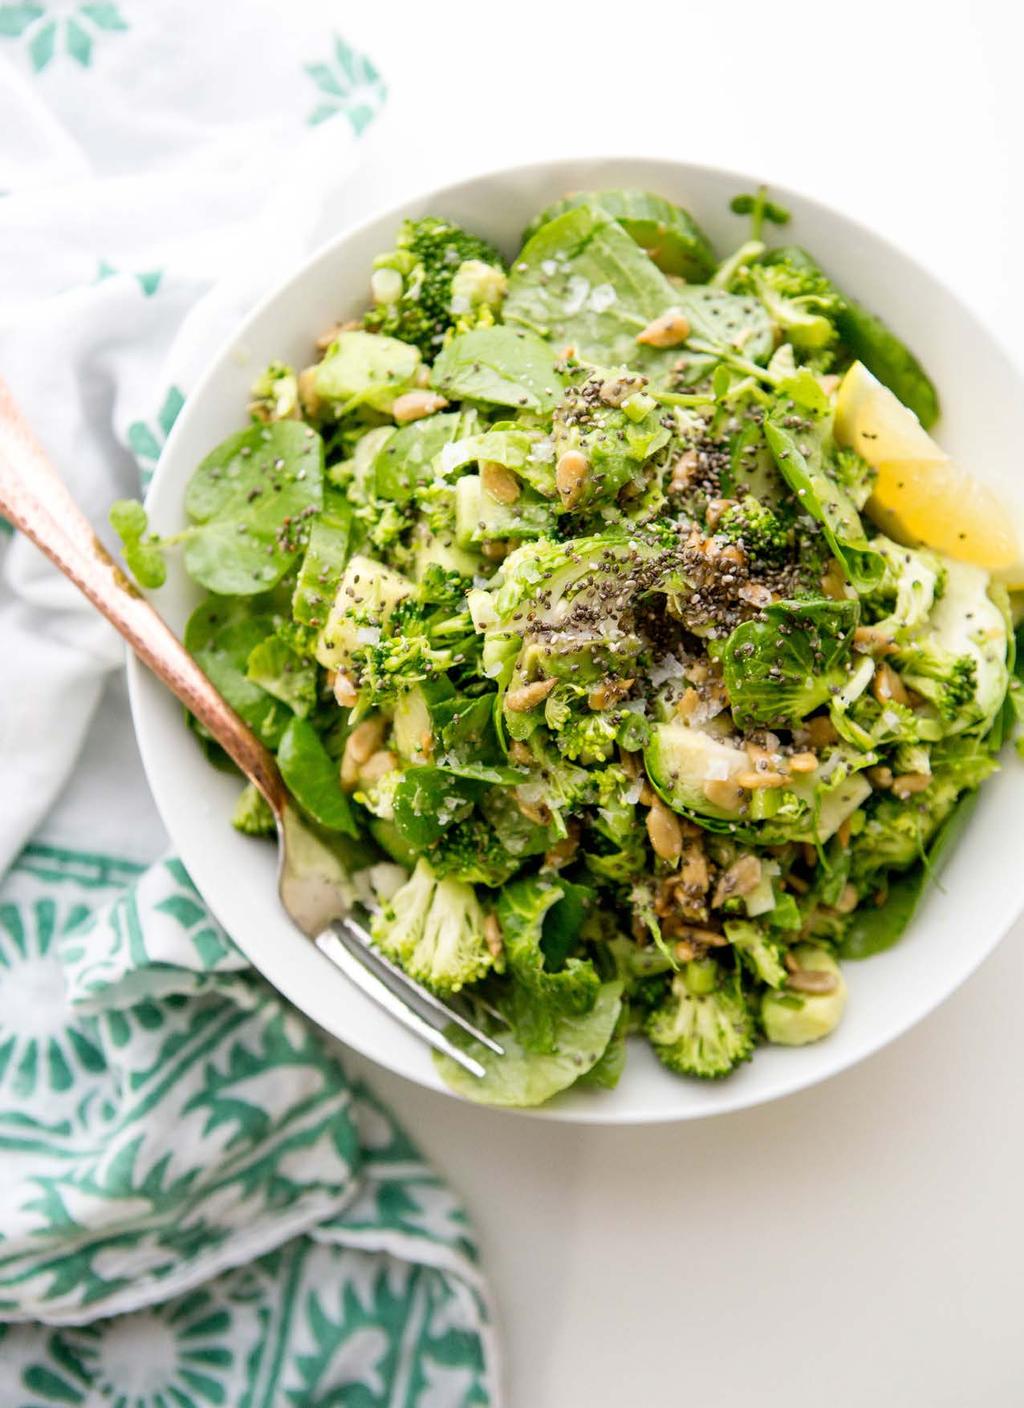 Salads 1. Green Detox Salad This delicious salad can be eaten anytime you need a fresh, light, nutrient-packed meal.